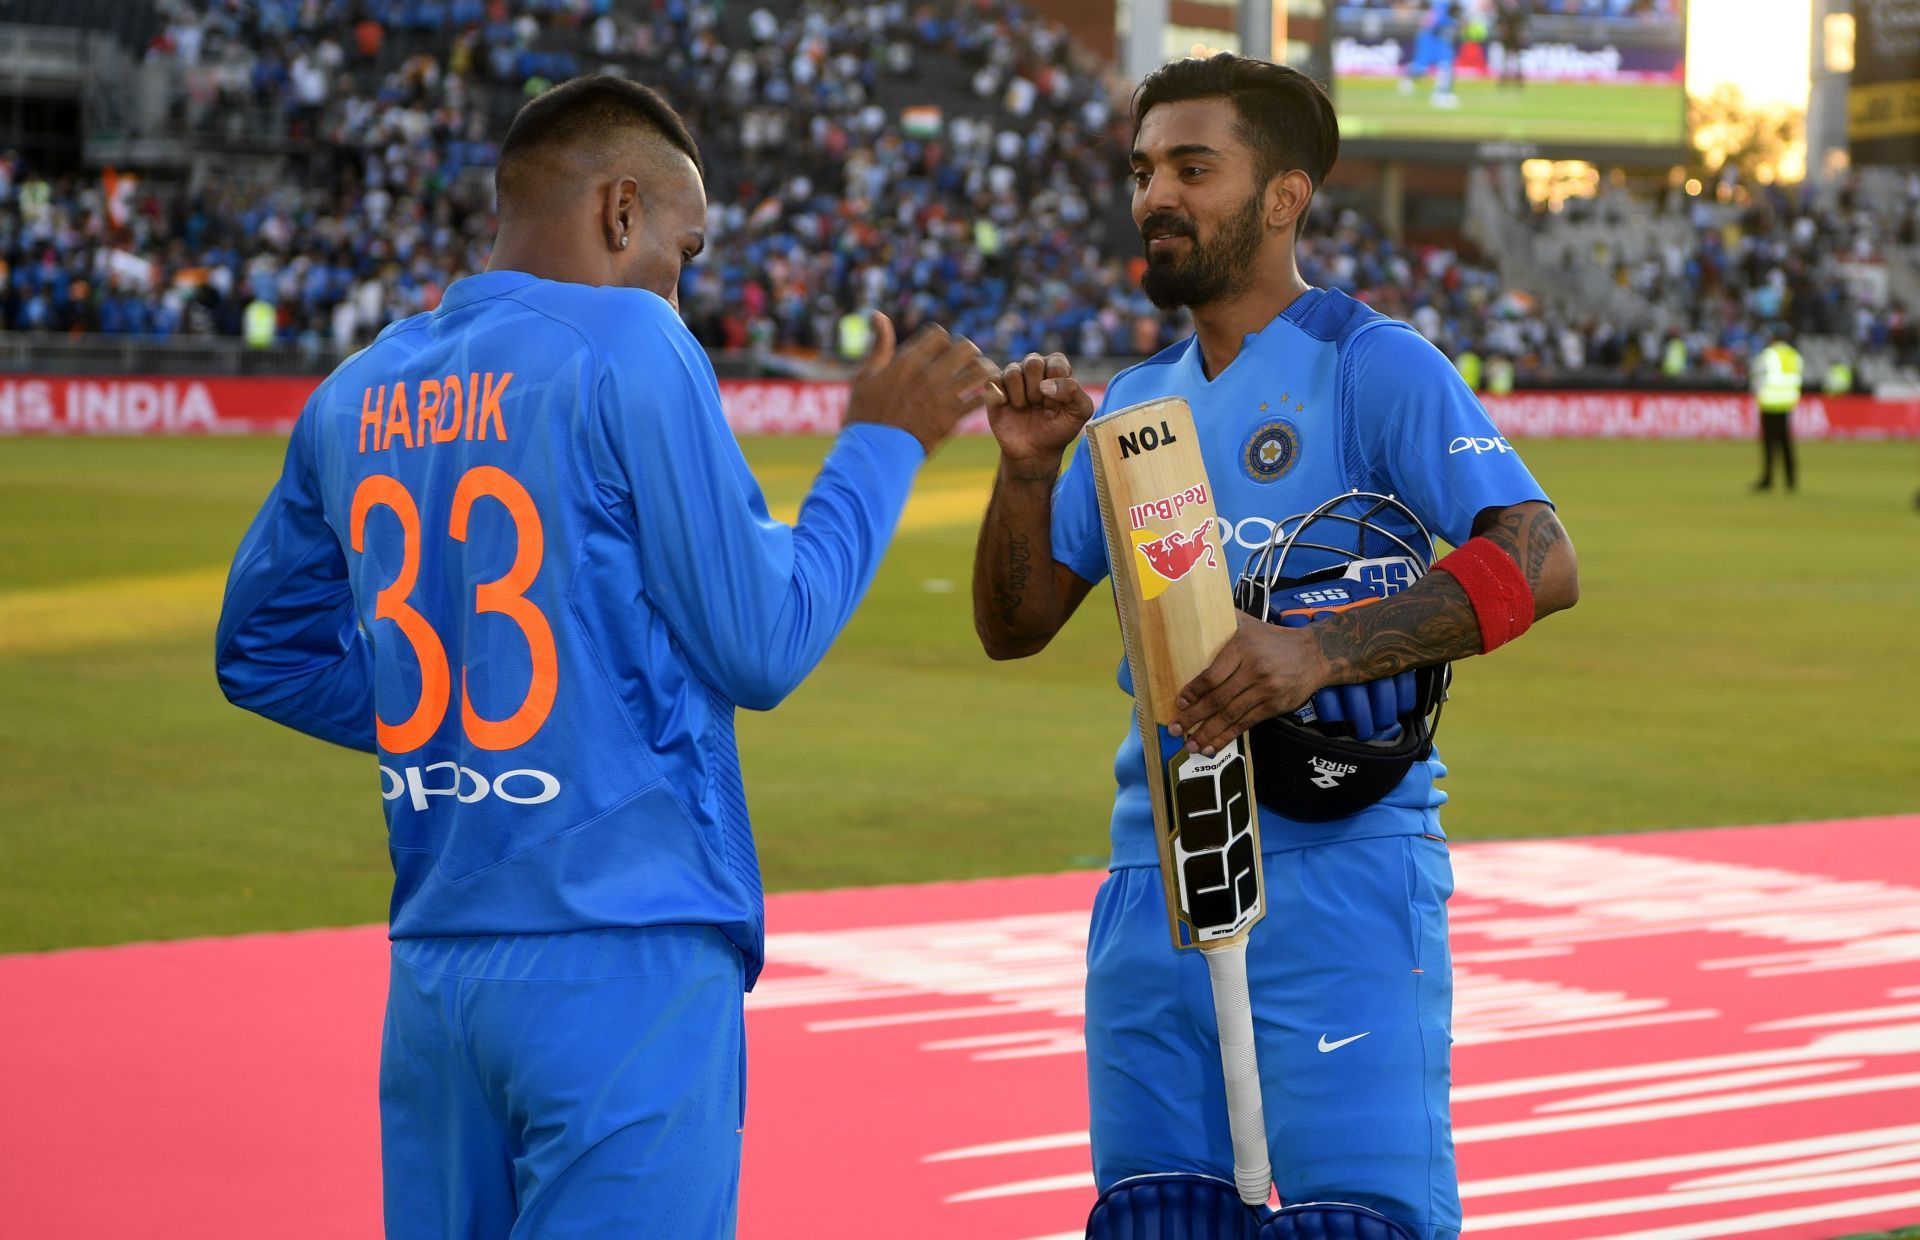 Indian cricketers KL Rahul and Hardik Pandya have missed many matches due to injury issues.